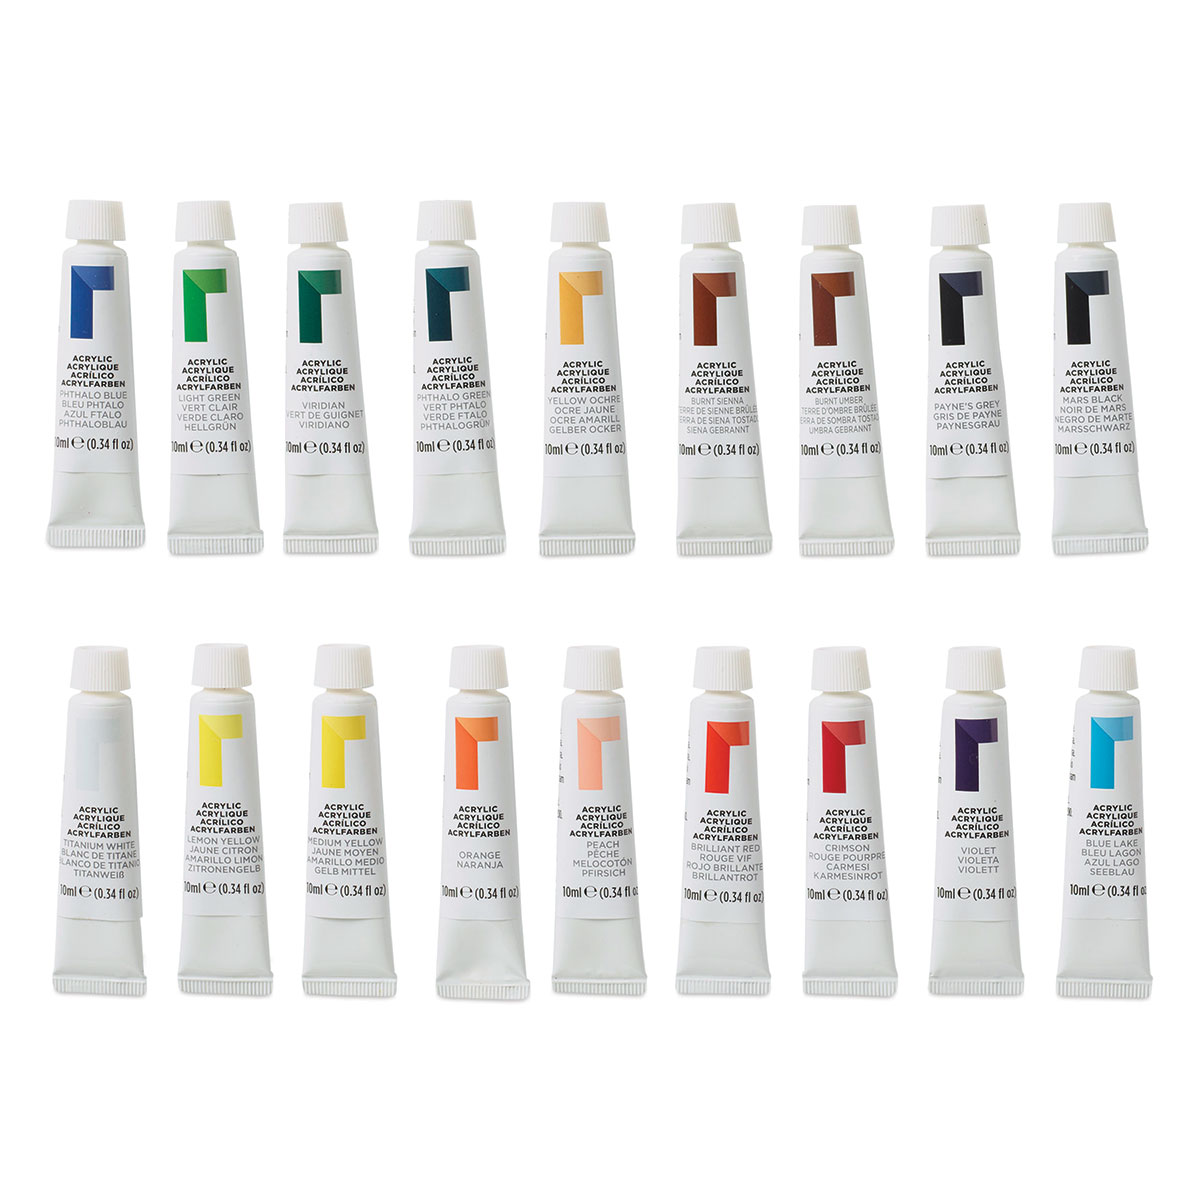 Reeves Acrylic Paint Colour Chart